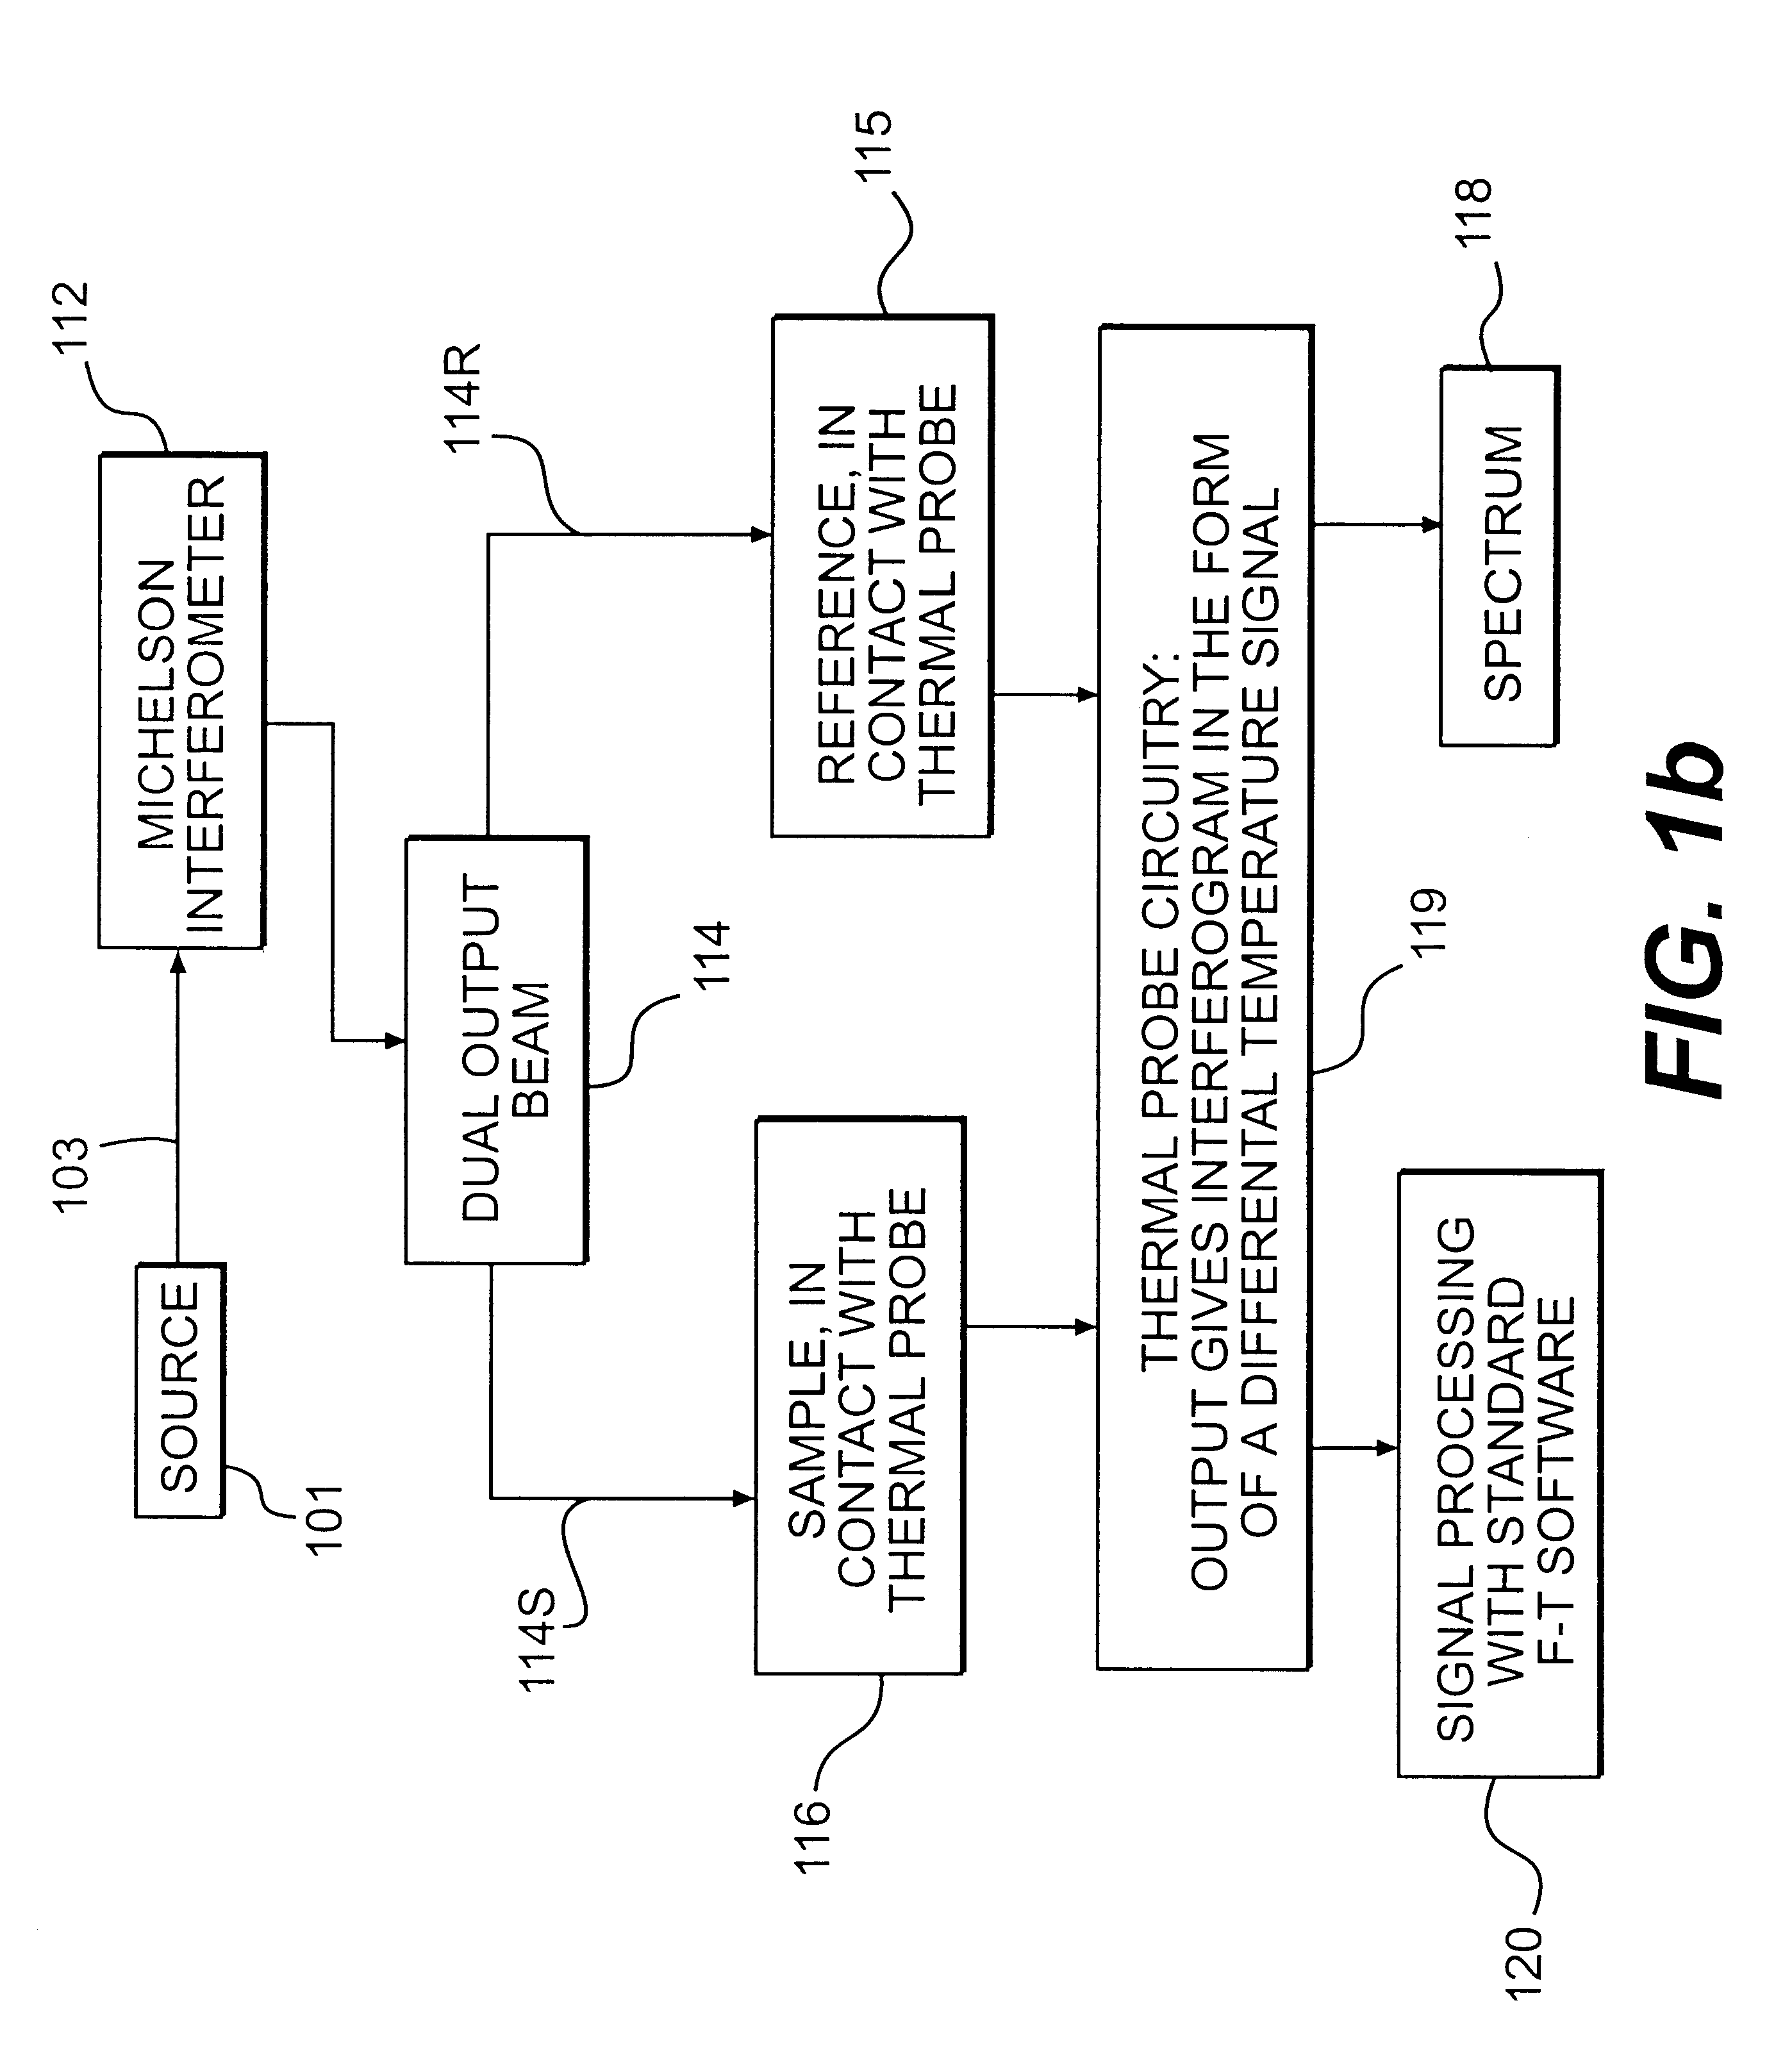 Method and apparatus for high spatial resolution spectroscopic microscopy